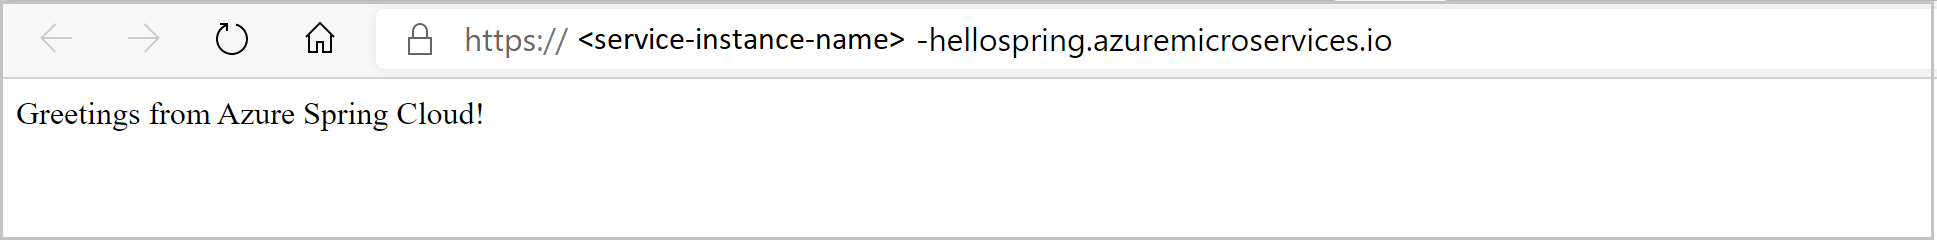 Screenshot of the hello spring app as seen in the browser.